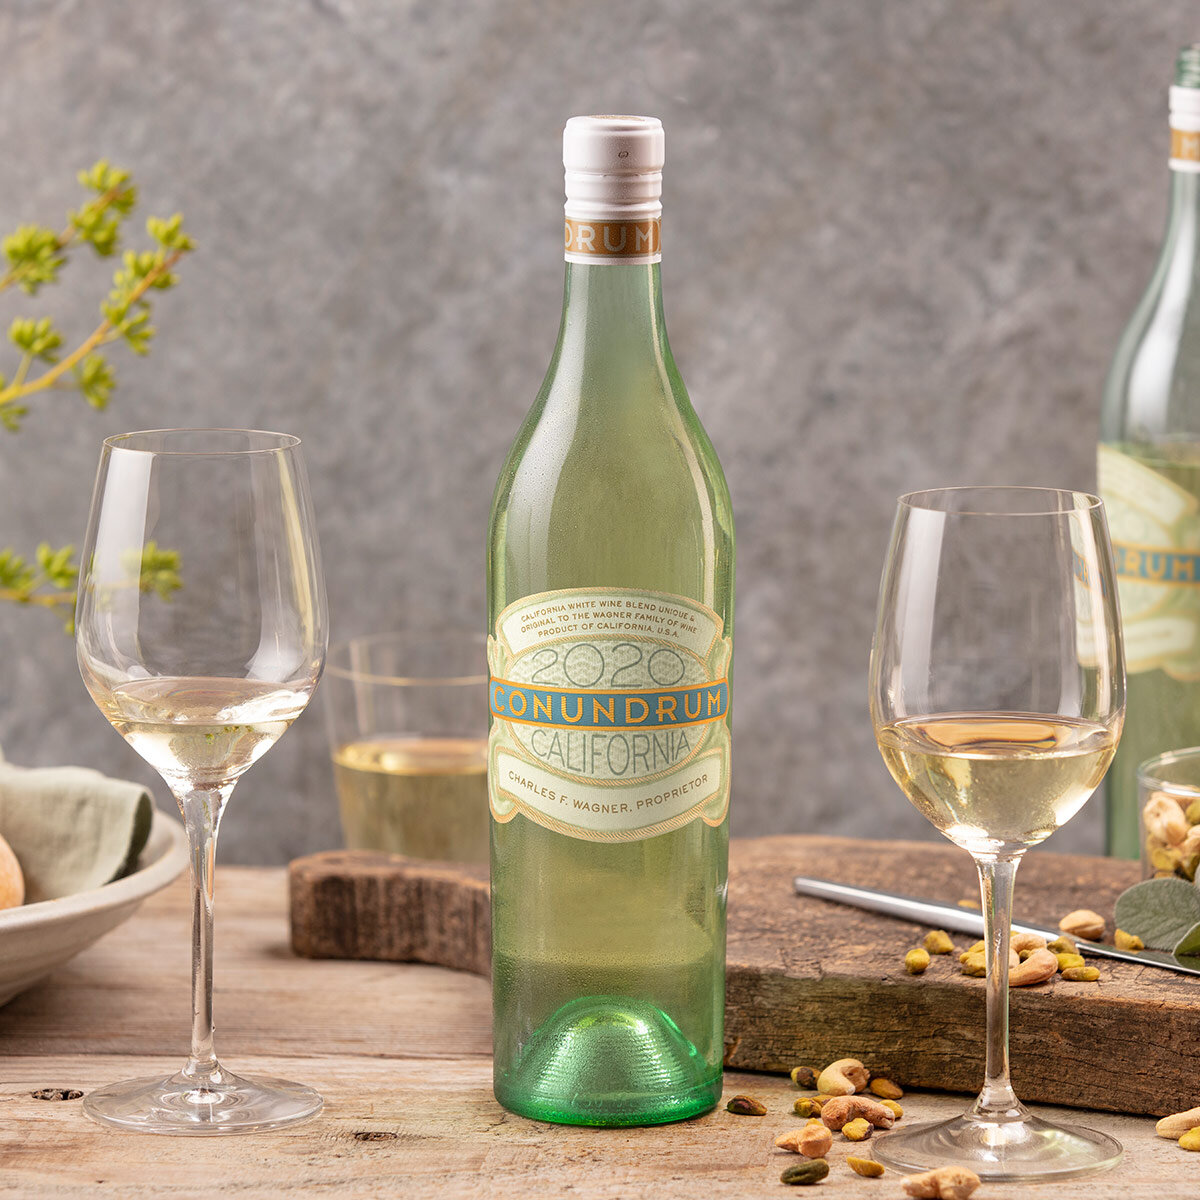 Lifestyle image of Conundrum White Wine Blend, with Glasses